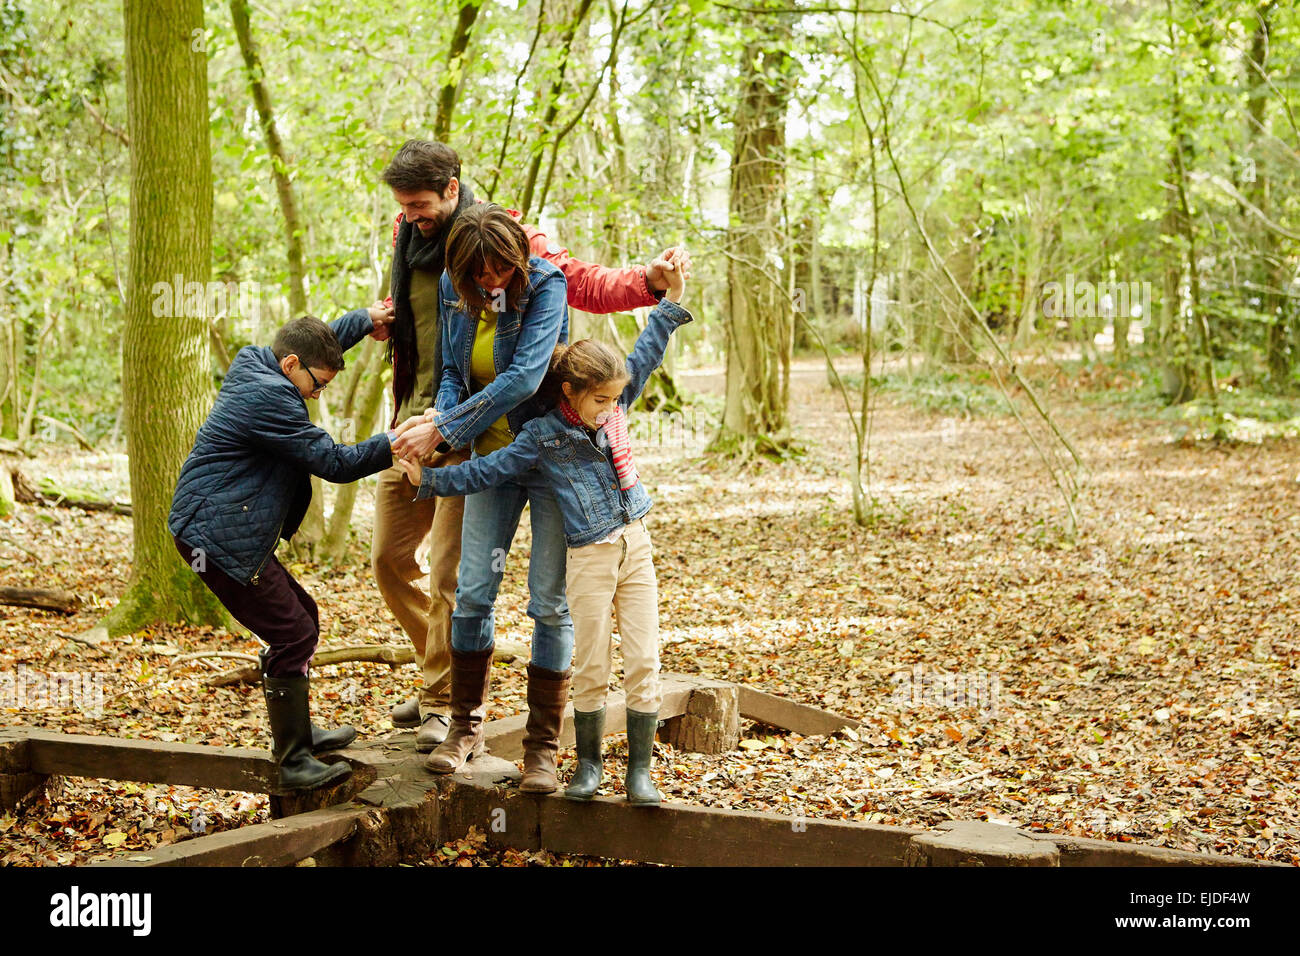 Beech woods in Autumn. A family of four holding hands and walking along wooden beams above the ground. Stock Photo